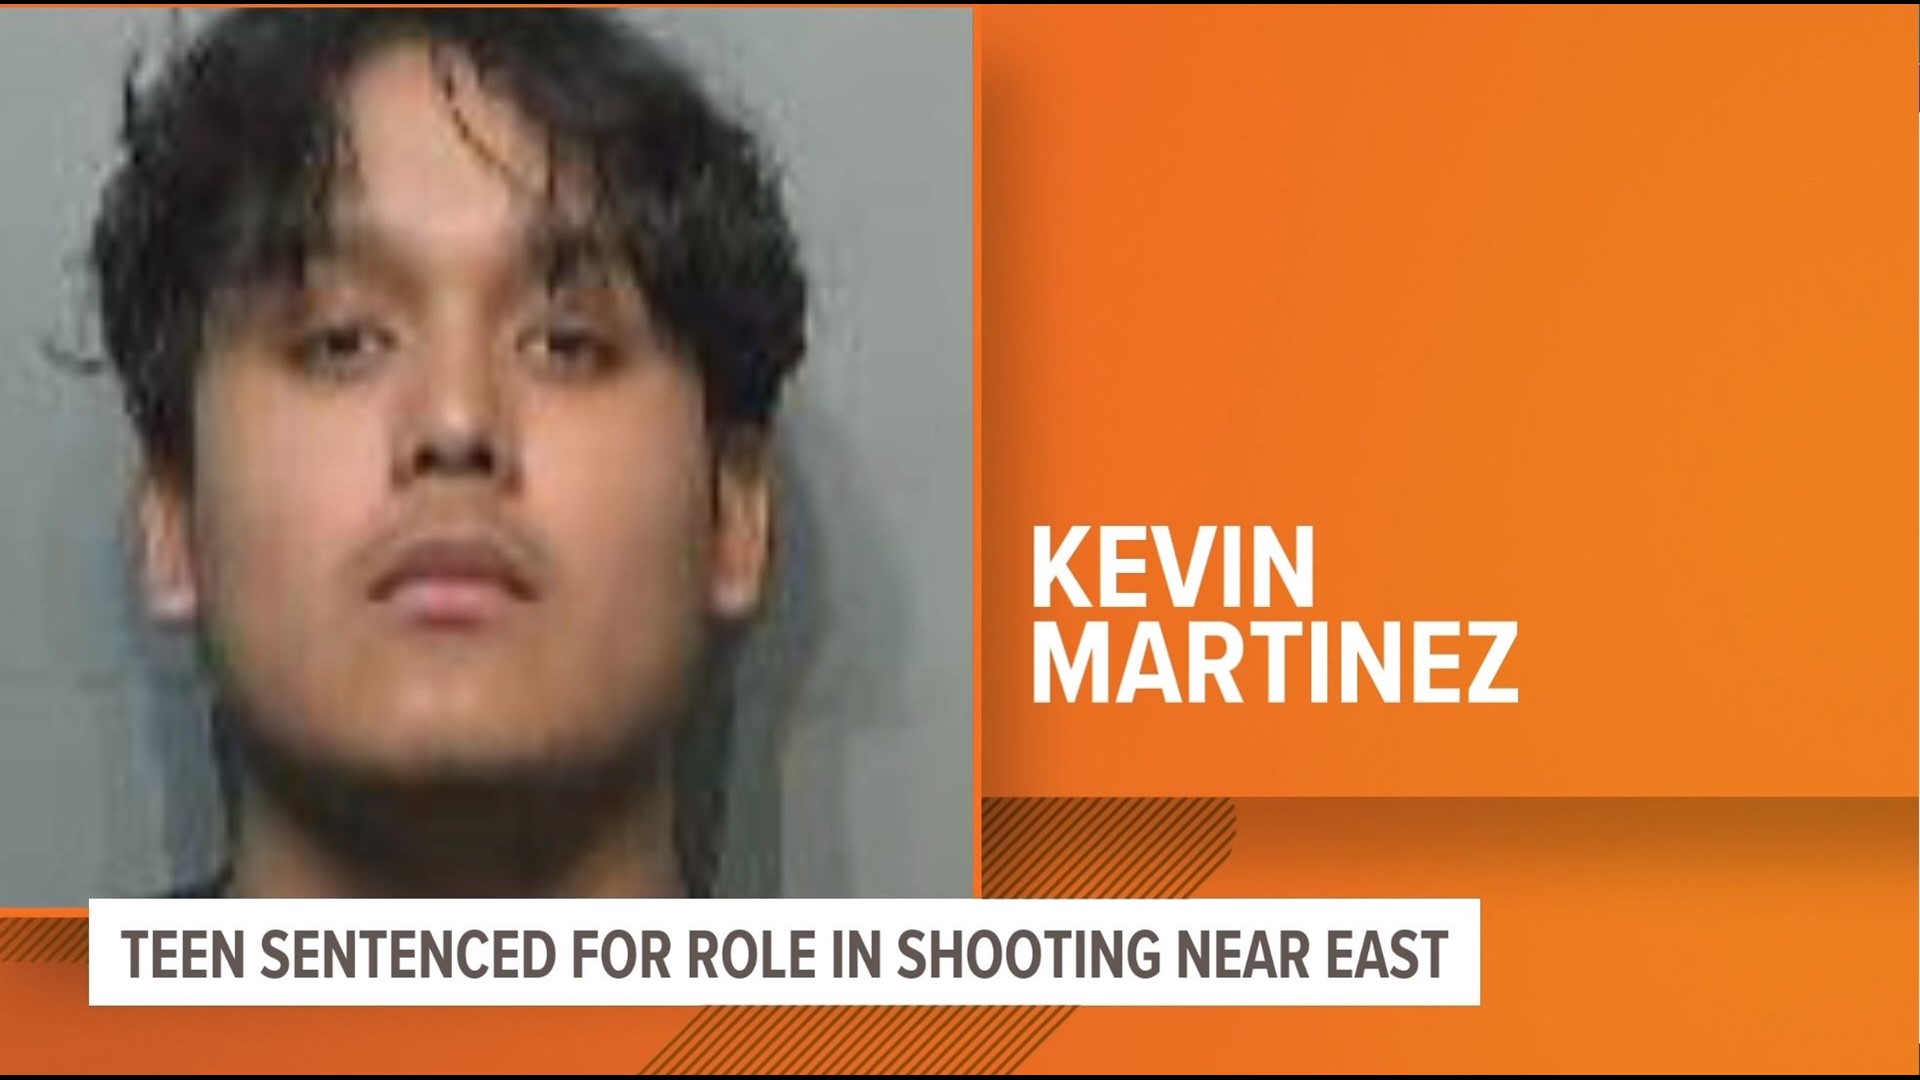 16-year-old Kevin Martinez will serve a total of 20 years after pleading guilty to two counts of intimidation with a dangerous weapon in the death of Jose Lopez.